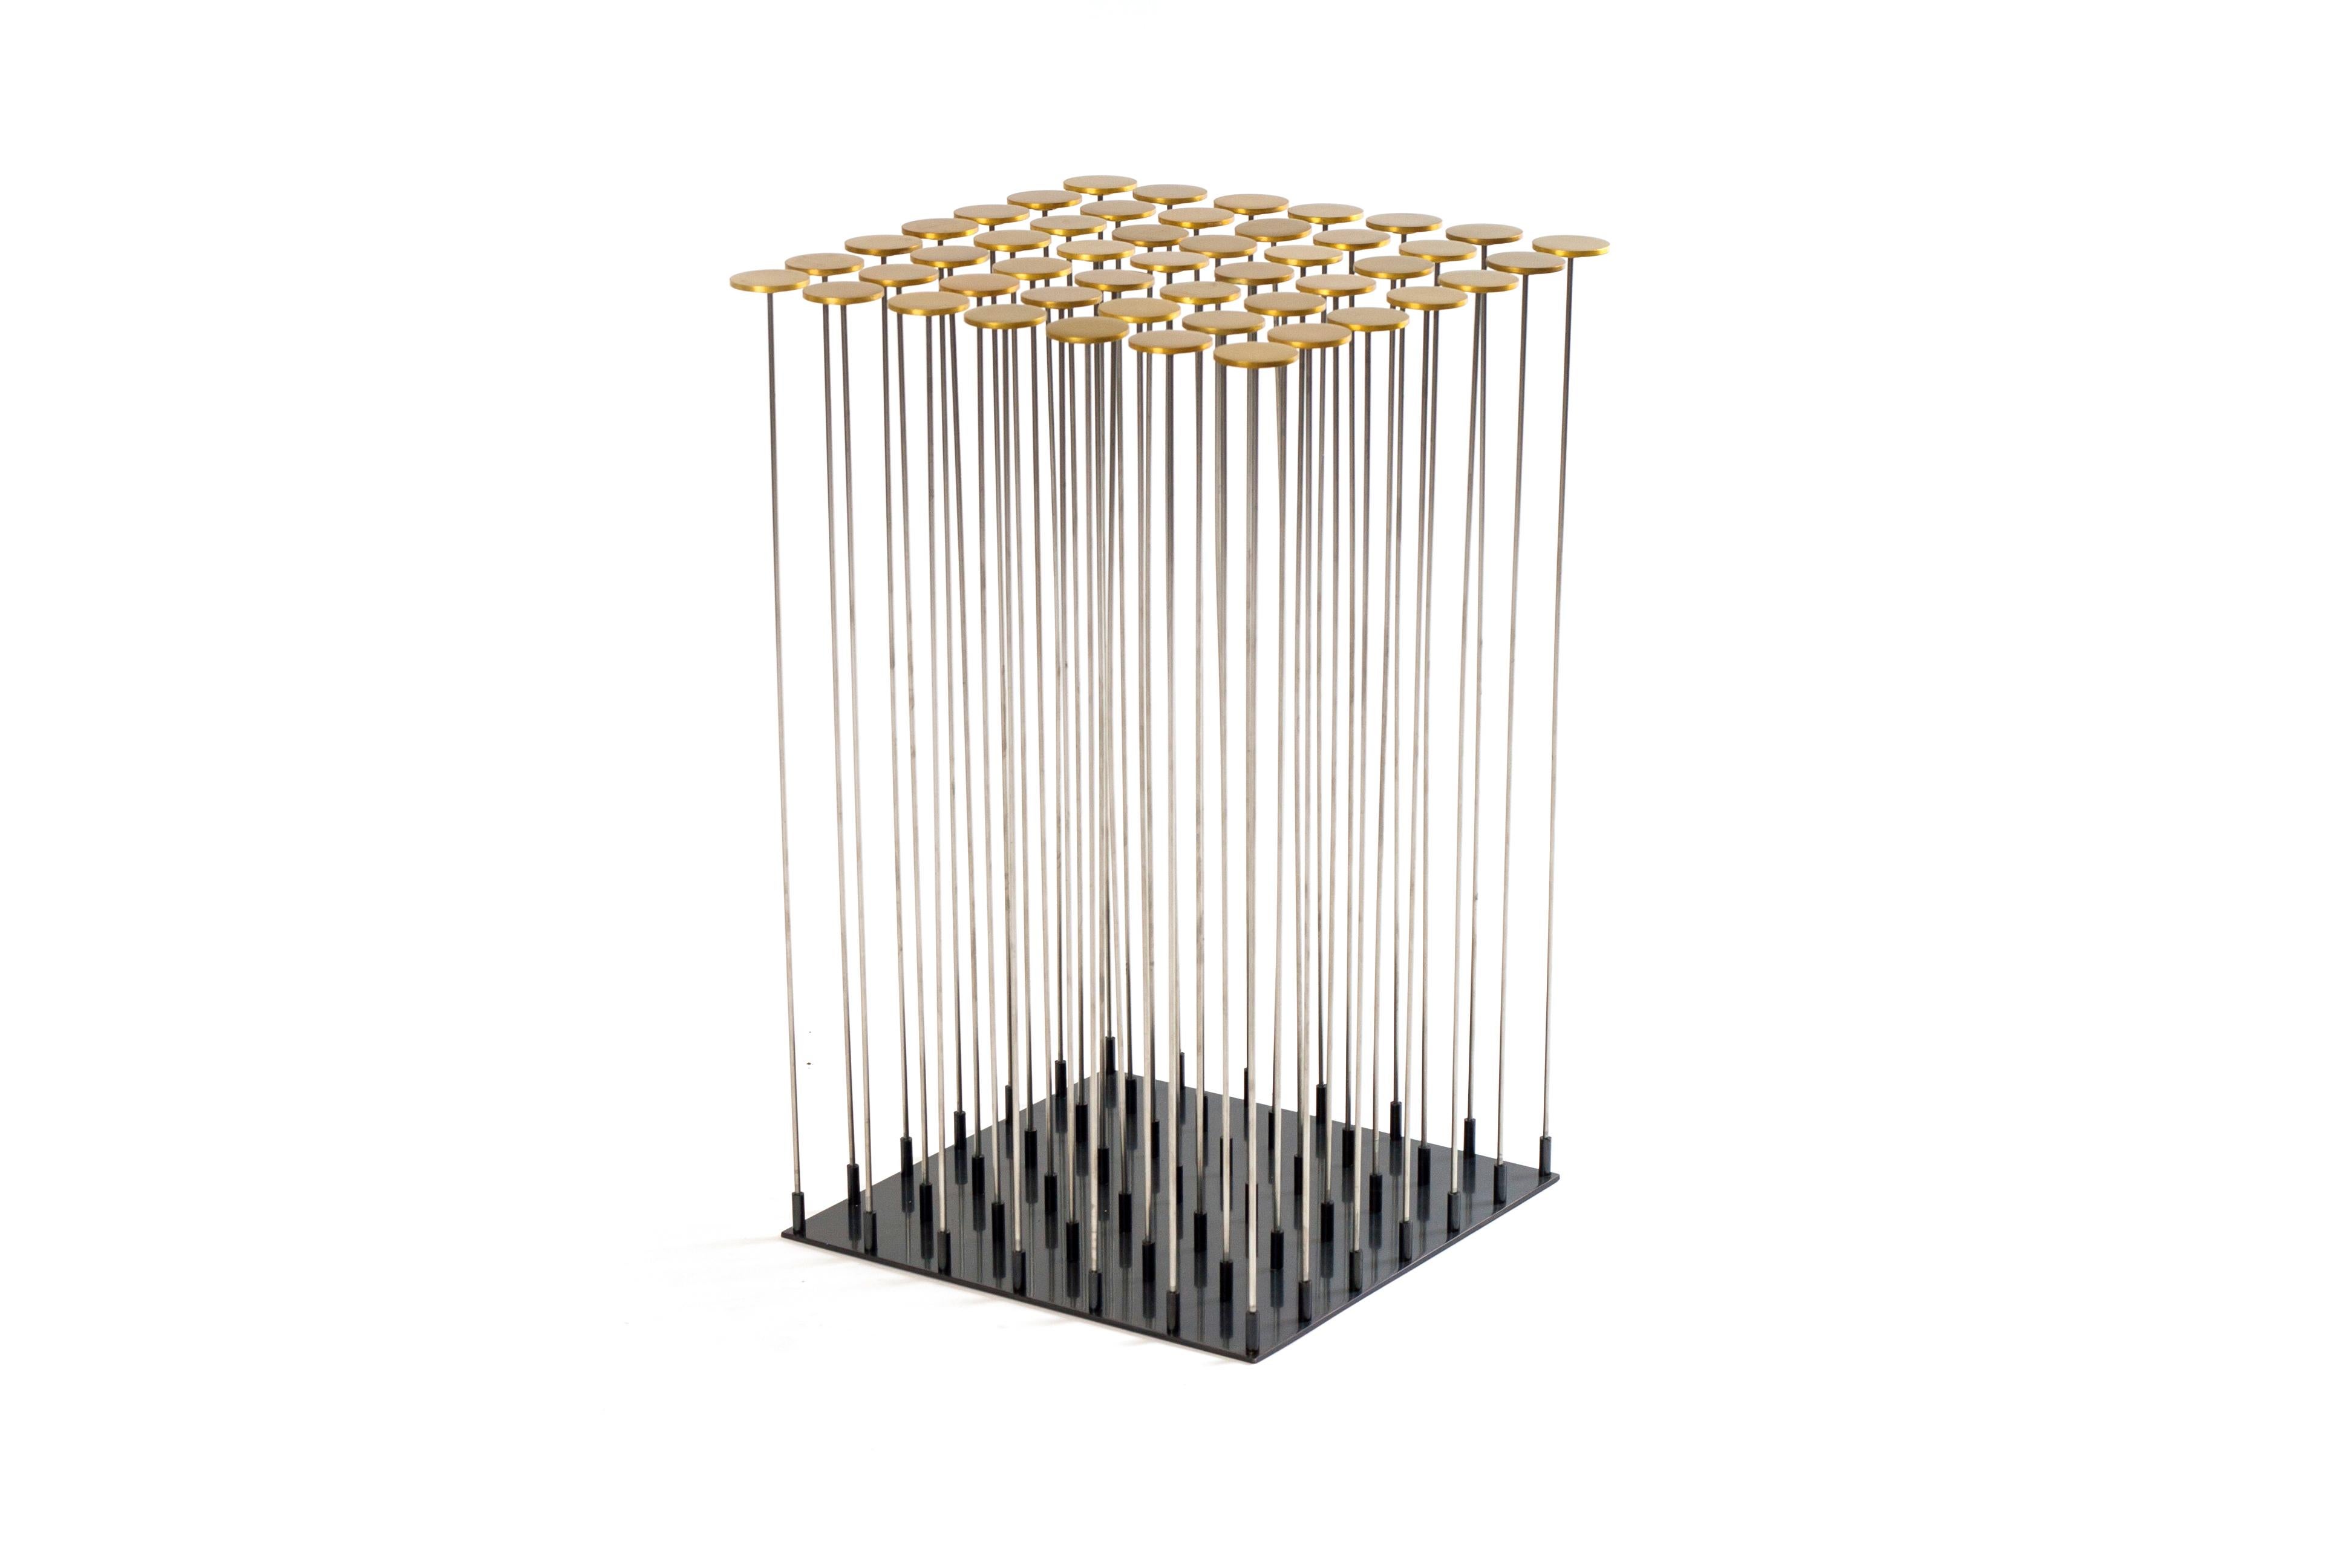 Dischi side table by Gentner Design.
Dimensions: D 30.5 x W 30.5 x H 48 cm.
Materials: brass, darkened stainless steel.

With a nod to Harry Bertoia, the Dischi table is both sculptural as it is functional. Amazingly stable as a table surface,